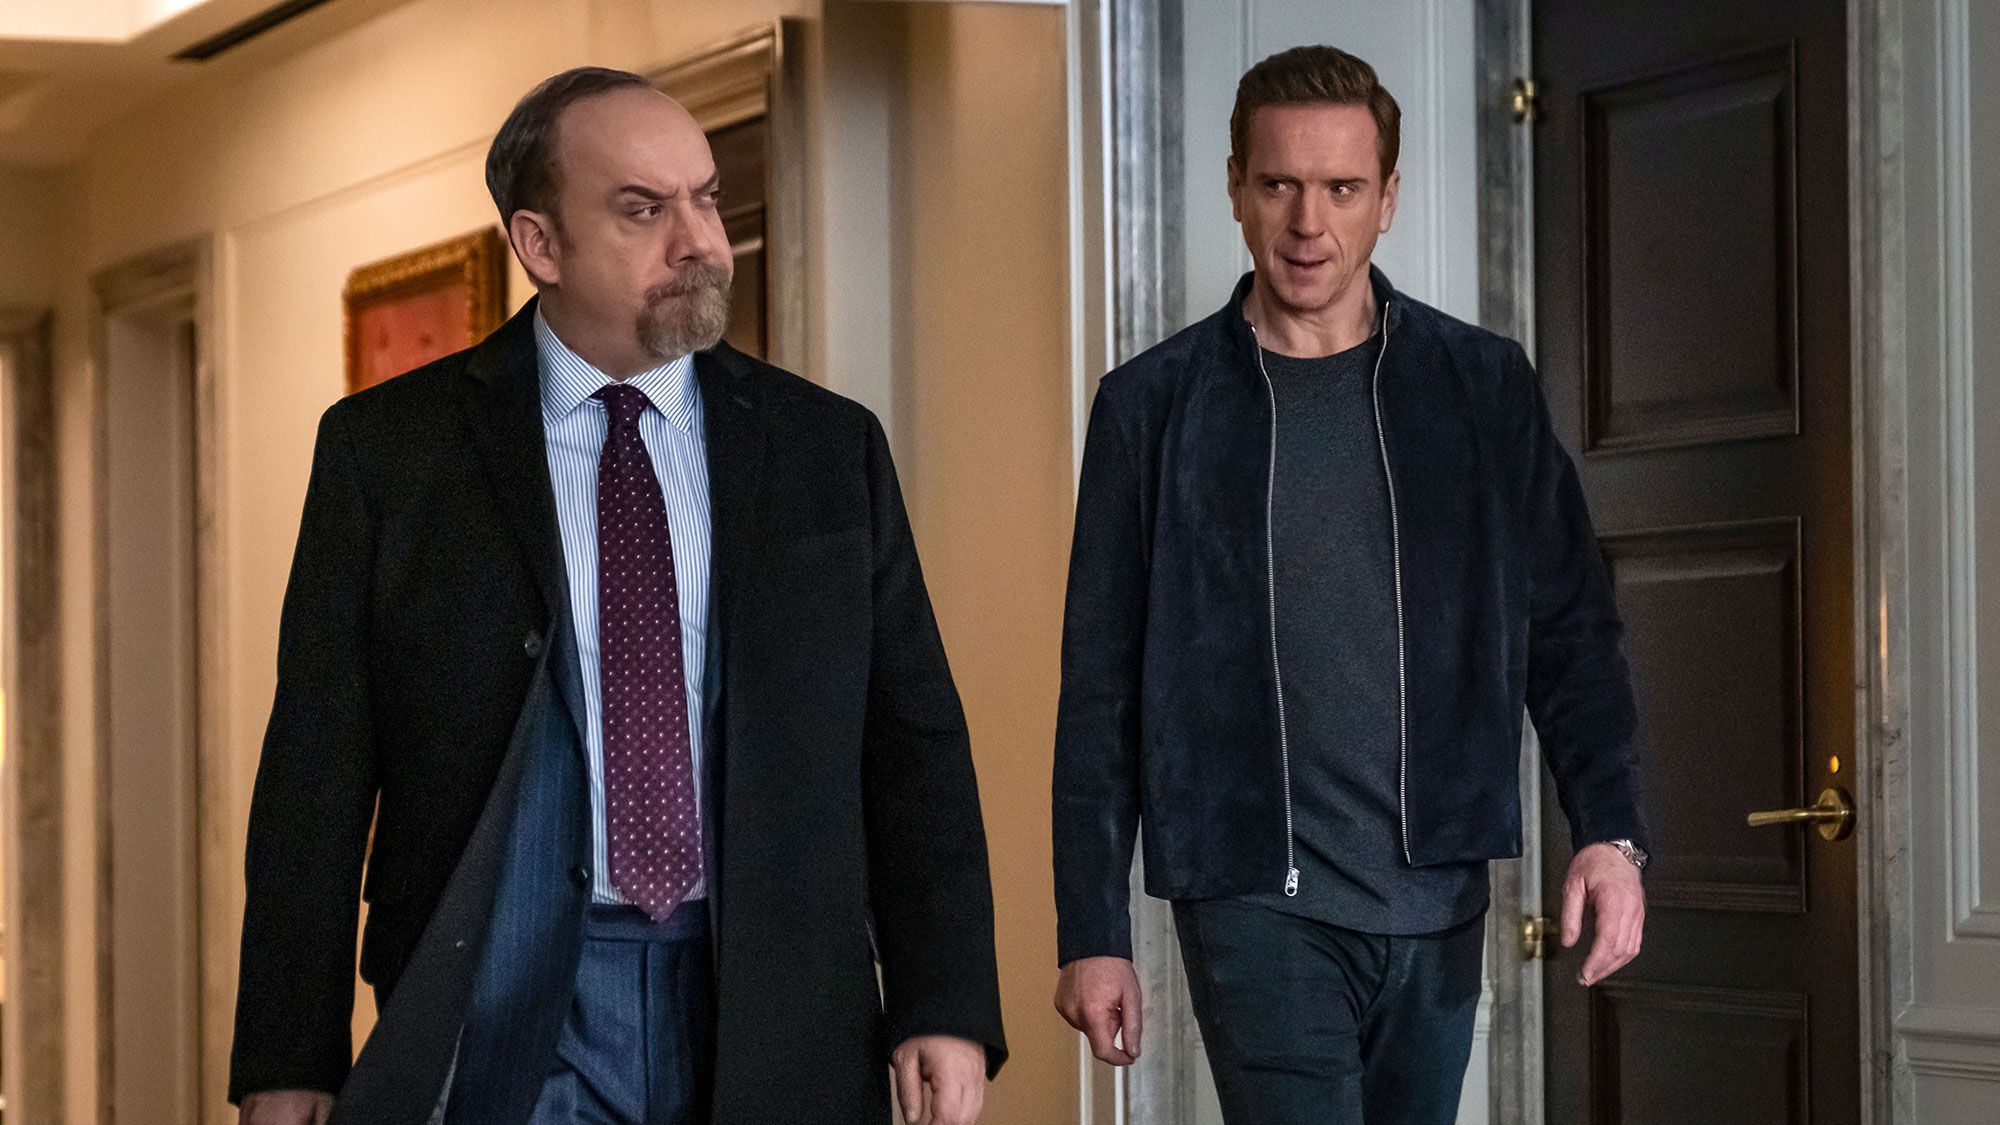 How to Watch and Stream 'Billions' Season 7 Online